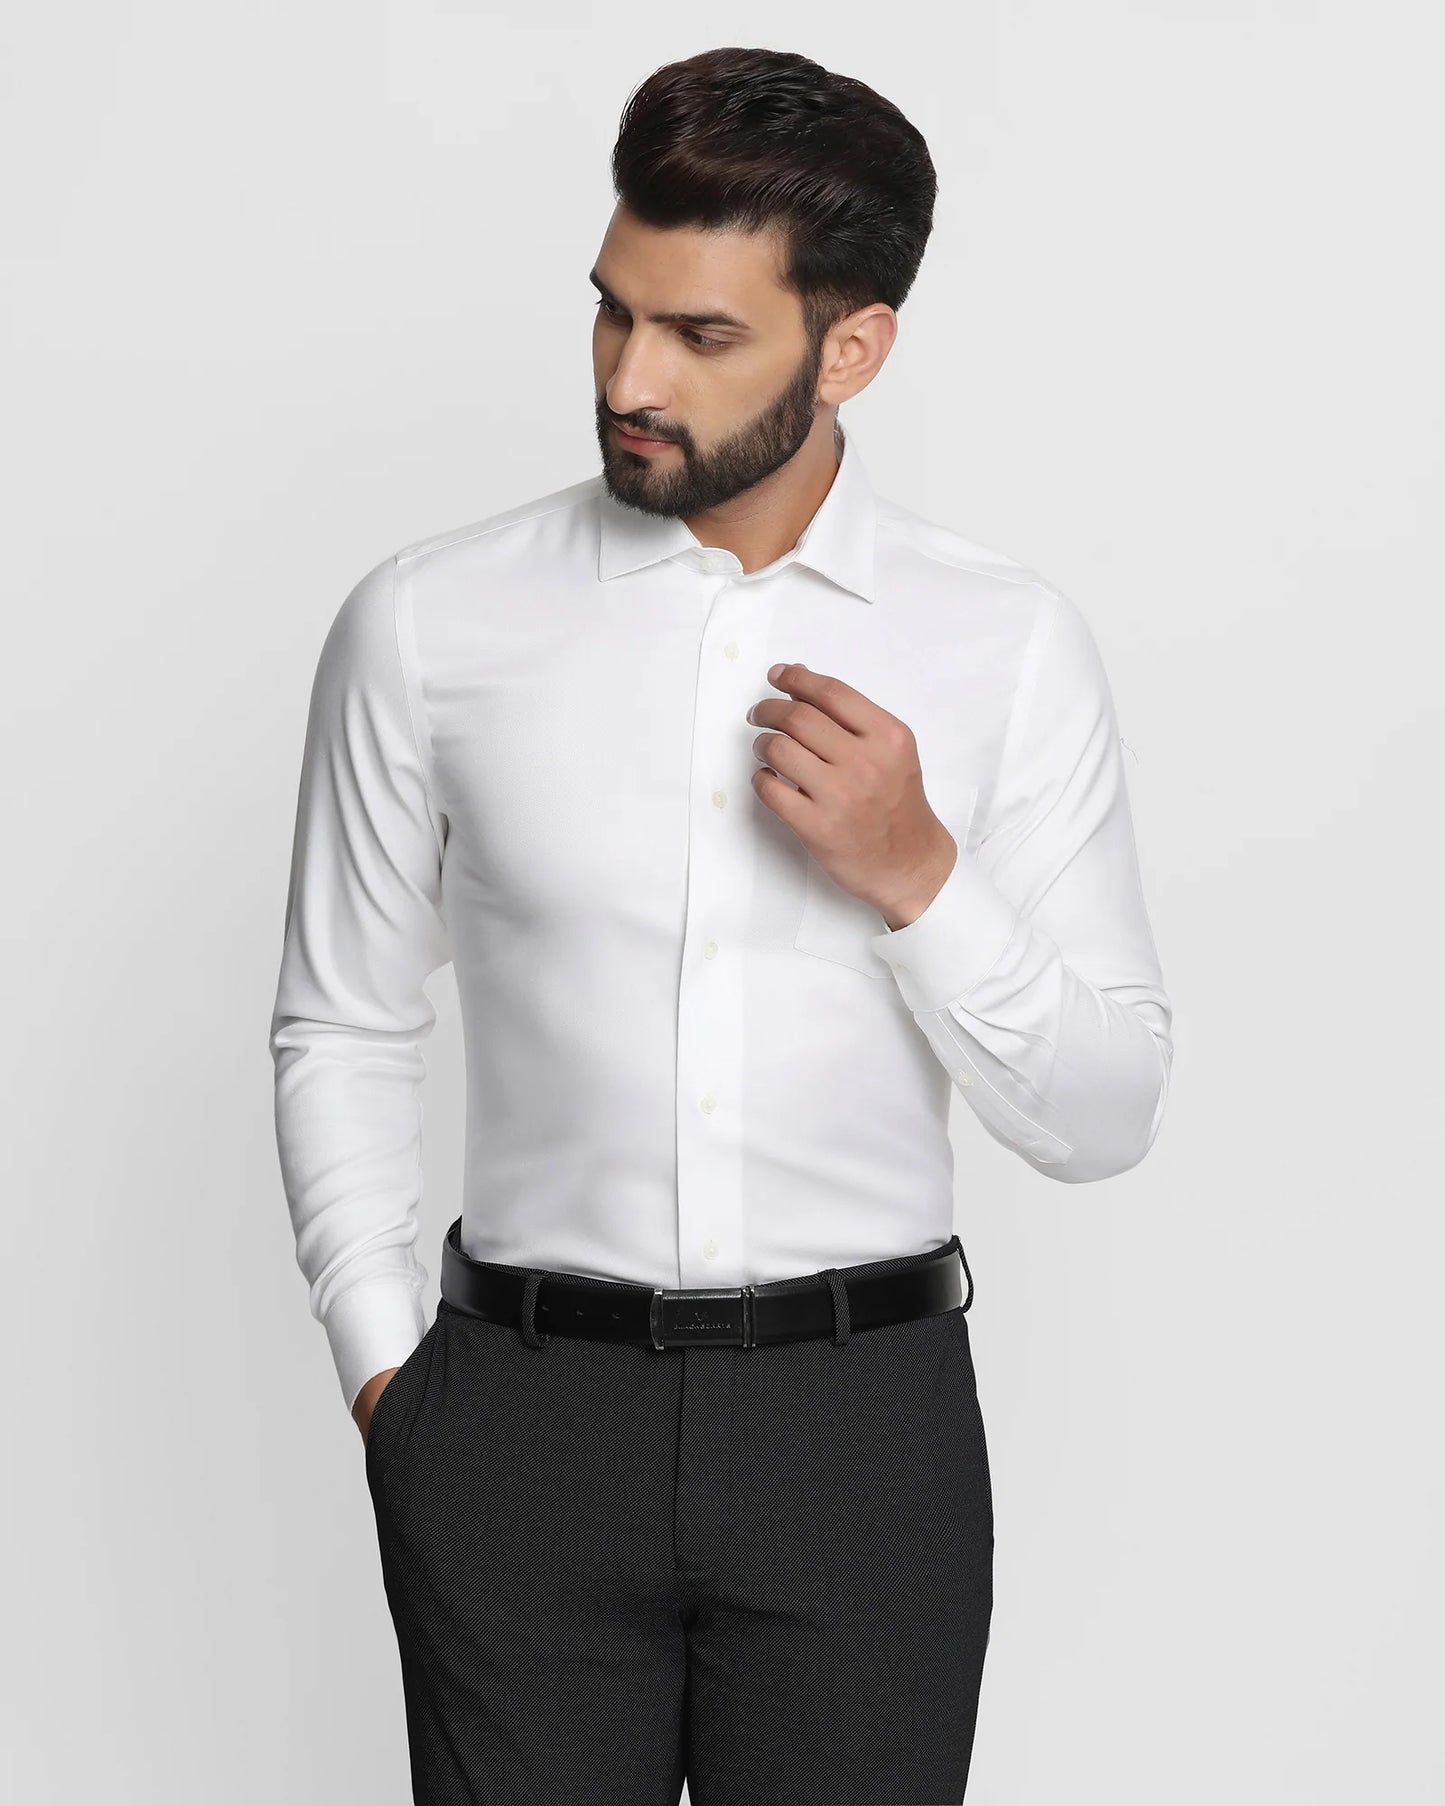 Solid formal shirt in white